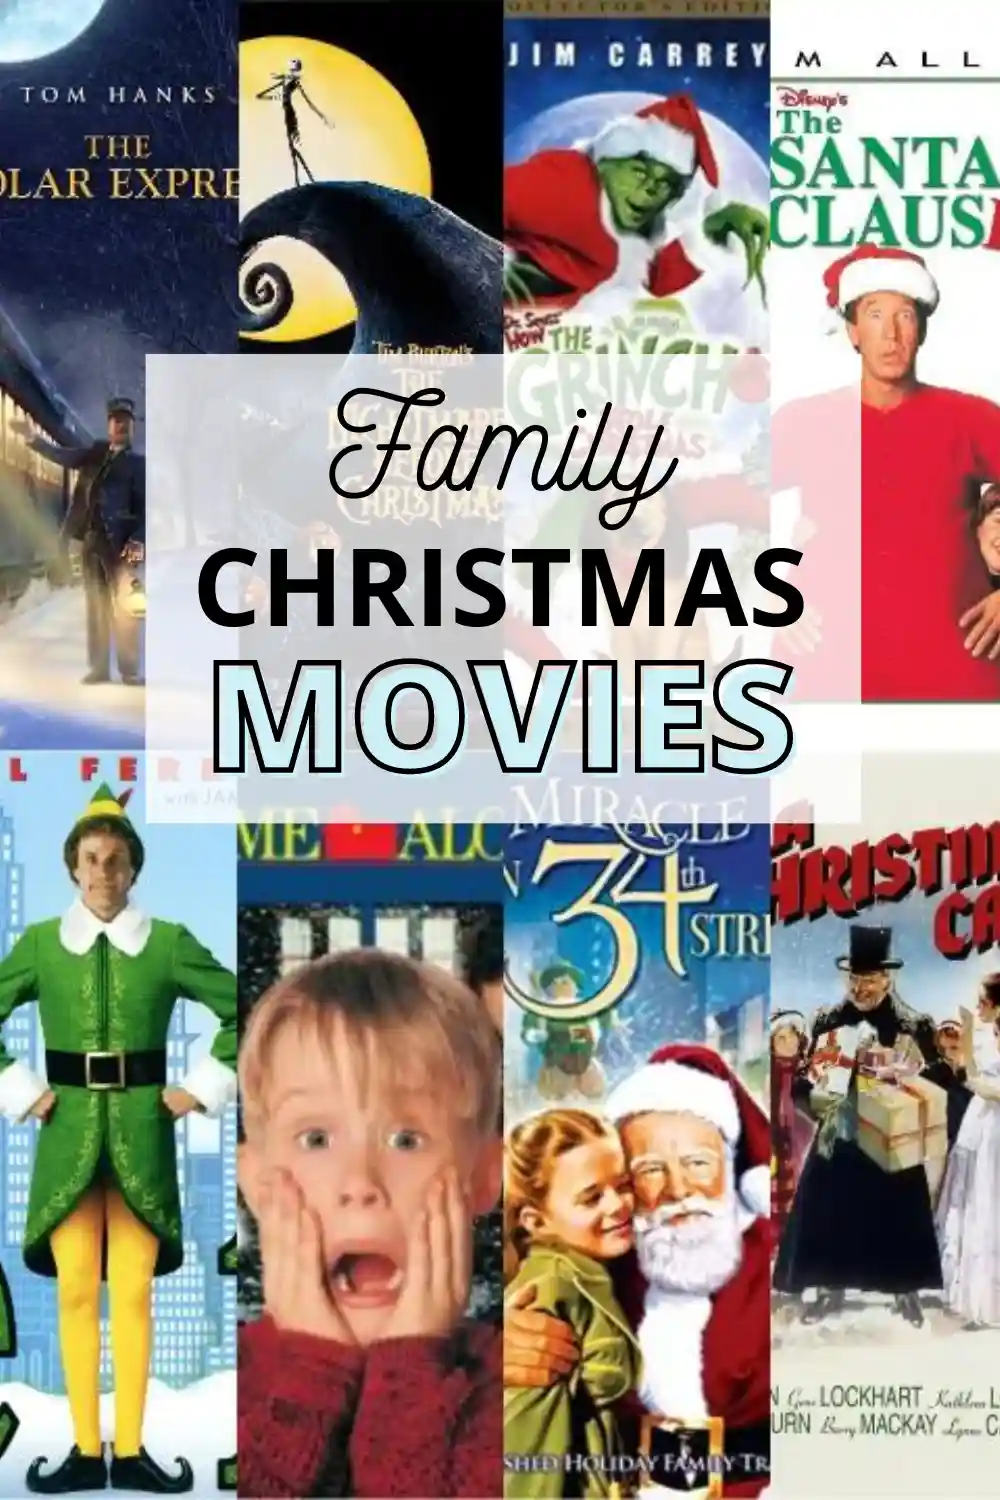 48 family friendly christmas movies for a christmas movie marathon. List includes all our favorites like Home Alone, Santa Clause, Elf, Miracle on 34th Street, A Wonderful Life, and more!